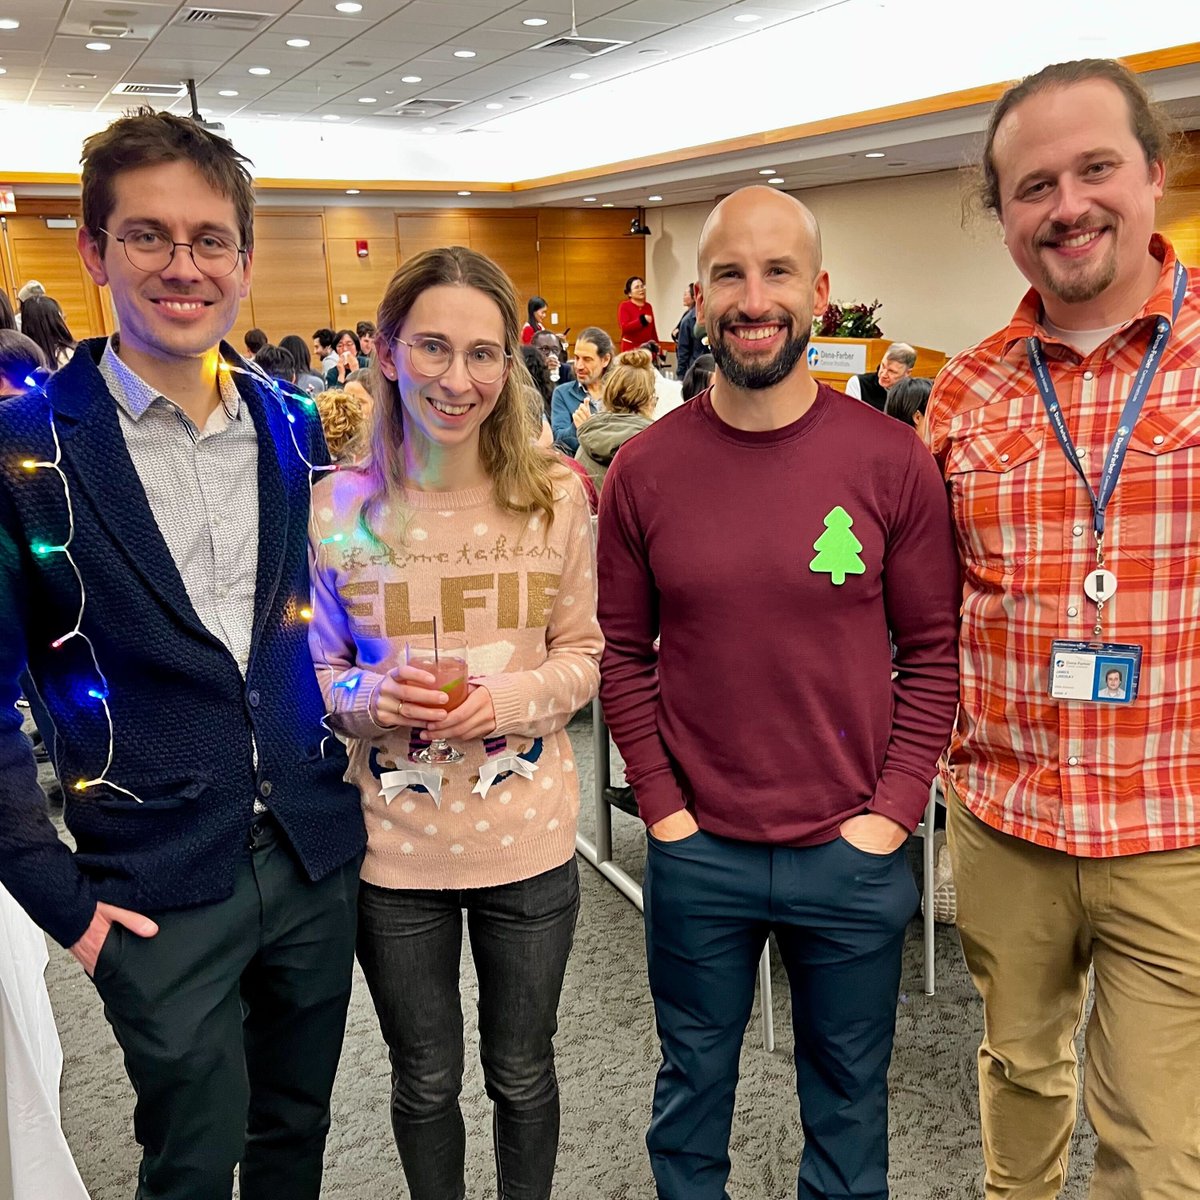 Still feeling joy from our 2023 Holiday Party. We're ready to drive #cancerresearch through innovation and collaboration in the quantitative sciences in 2024 and beyond!